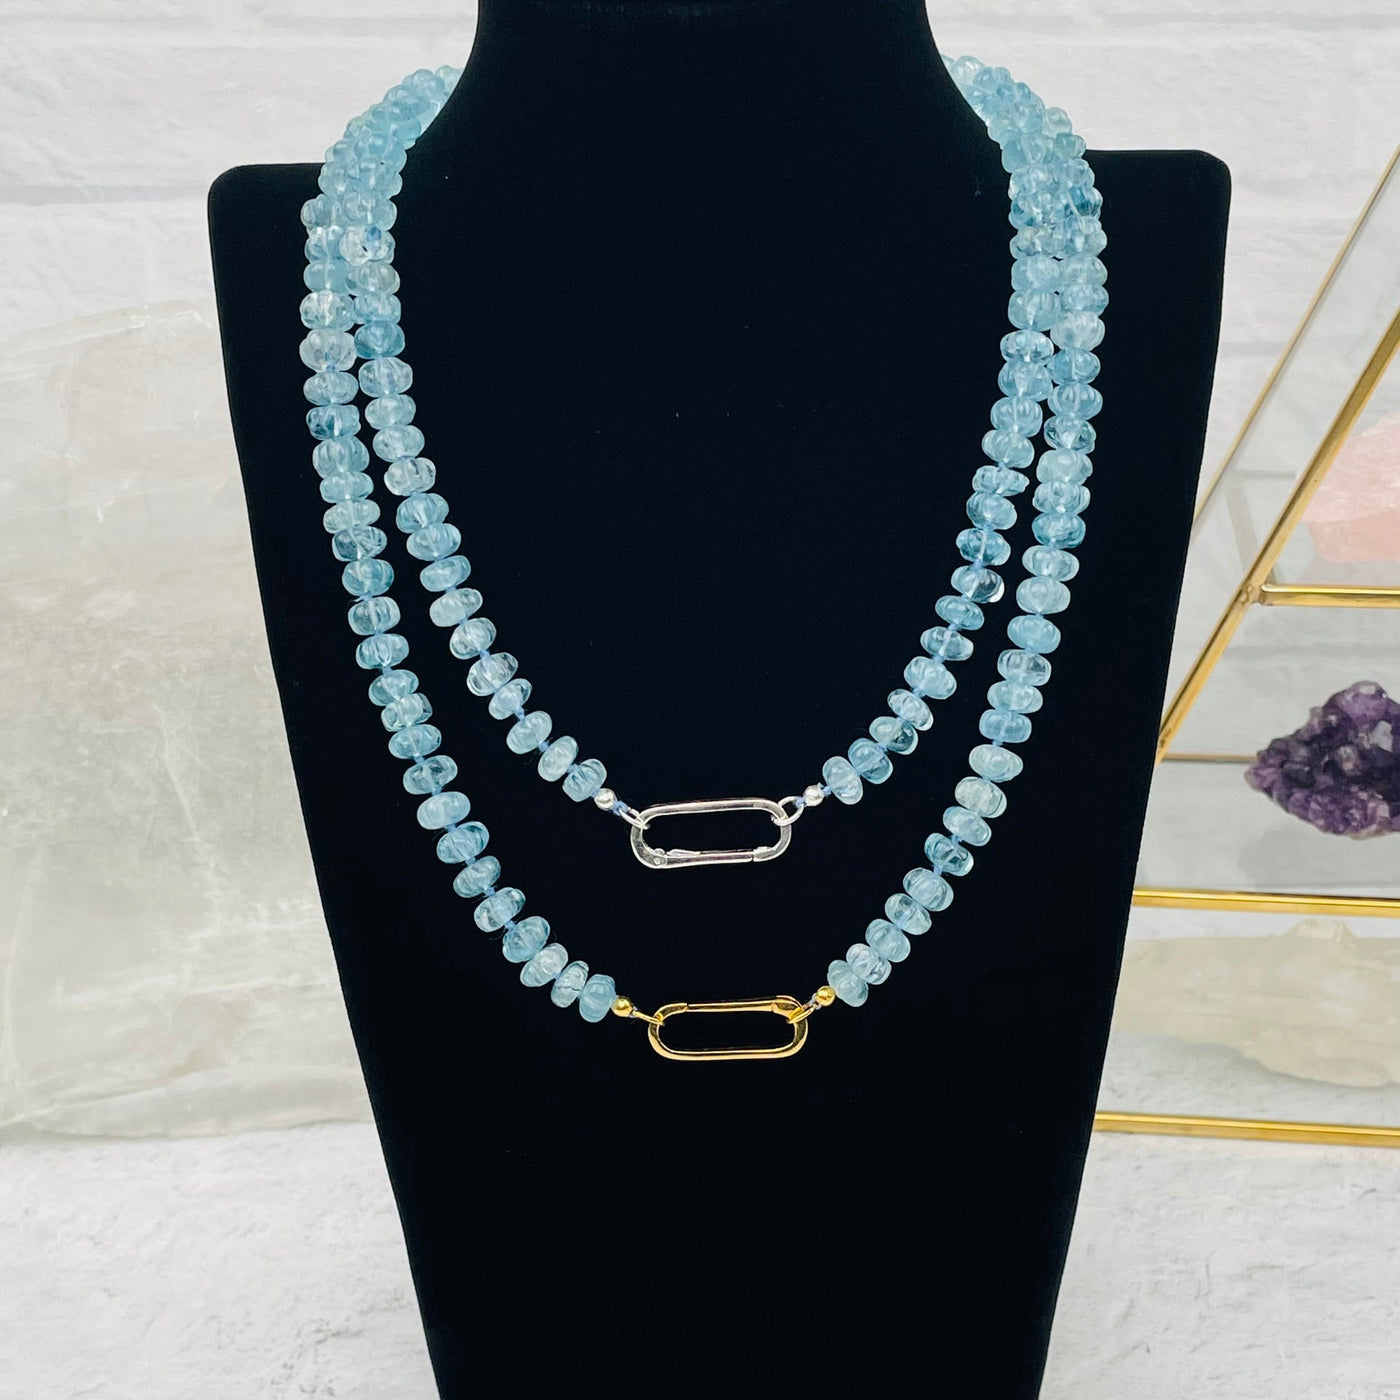 Aquamarine Melon Bead Candy Necklace - You Choose Style 